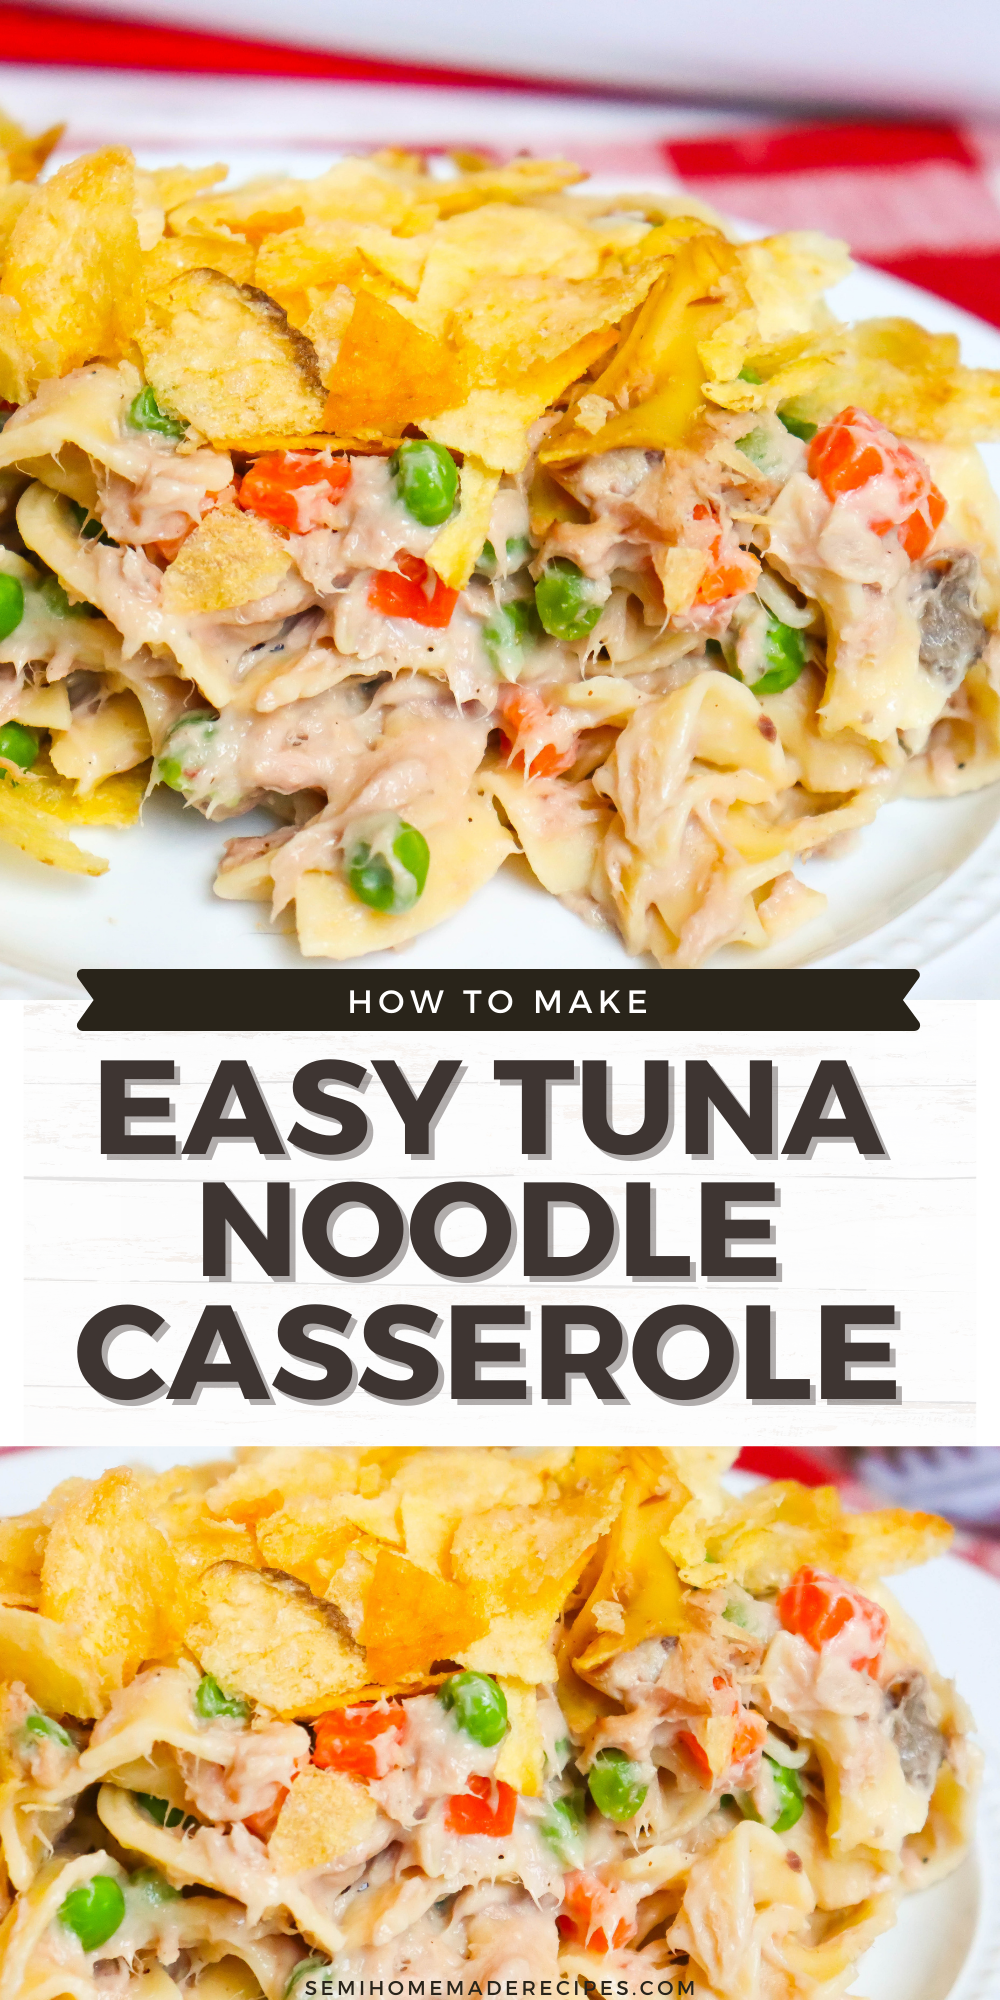 Easy Tuna Noodle Casserole - a classic favorite with egg noodles, lots of tuna, green peas, carrots and classic mushroom soup. We packed even more tuna into our casserole than the average tuna casserole so you get tuna in every bite! 